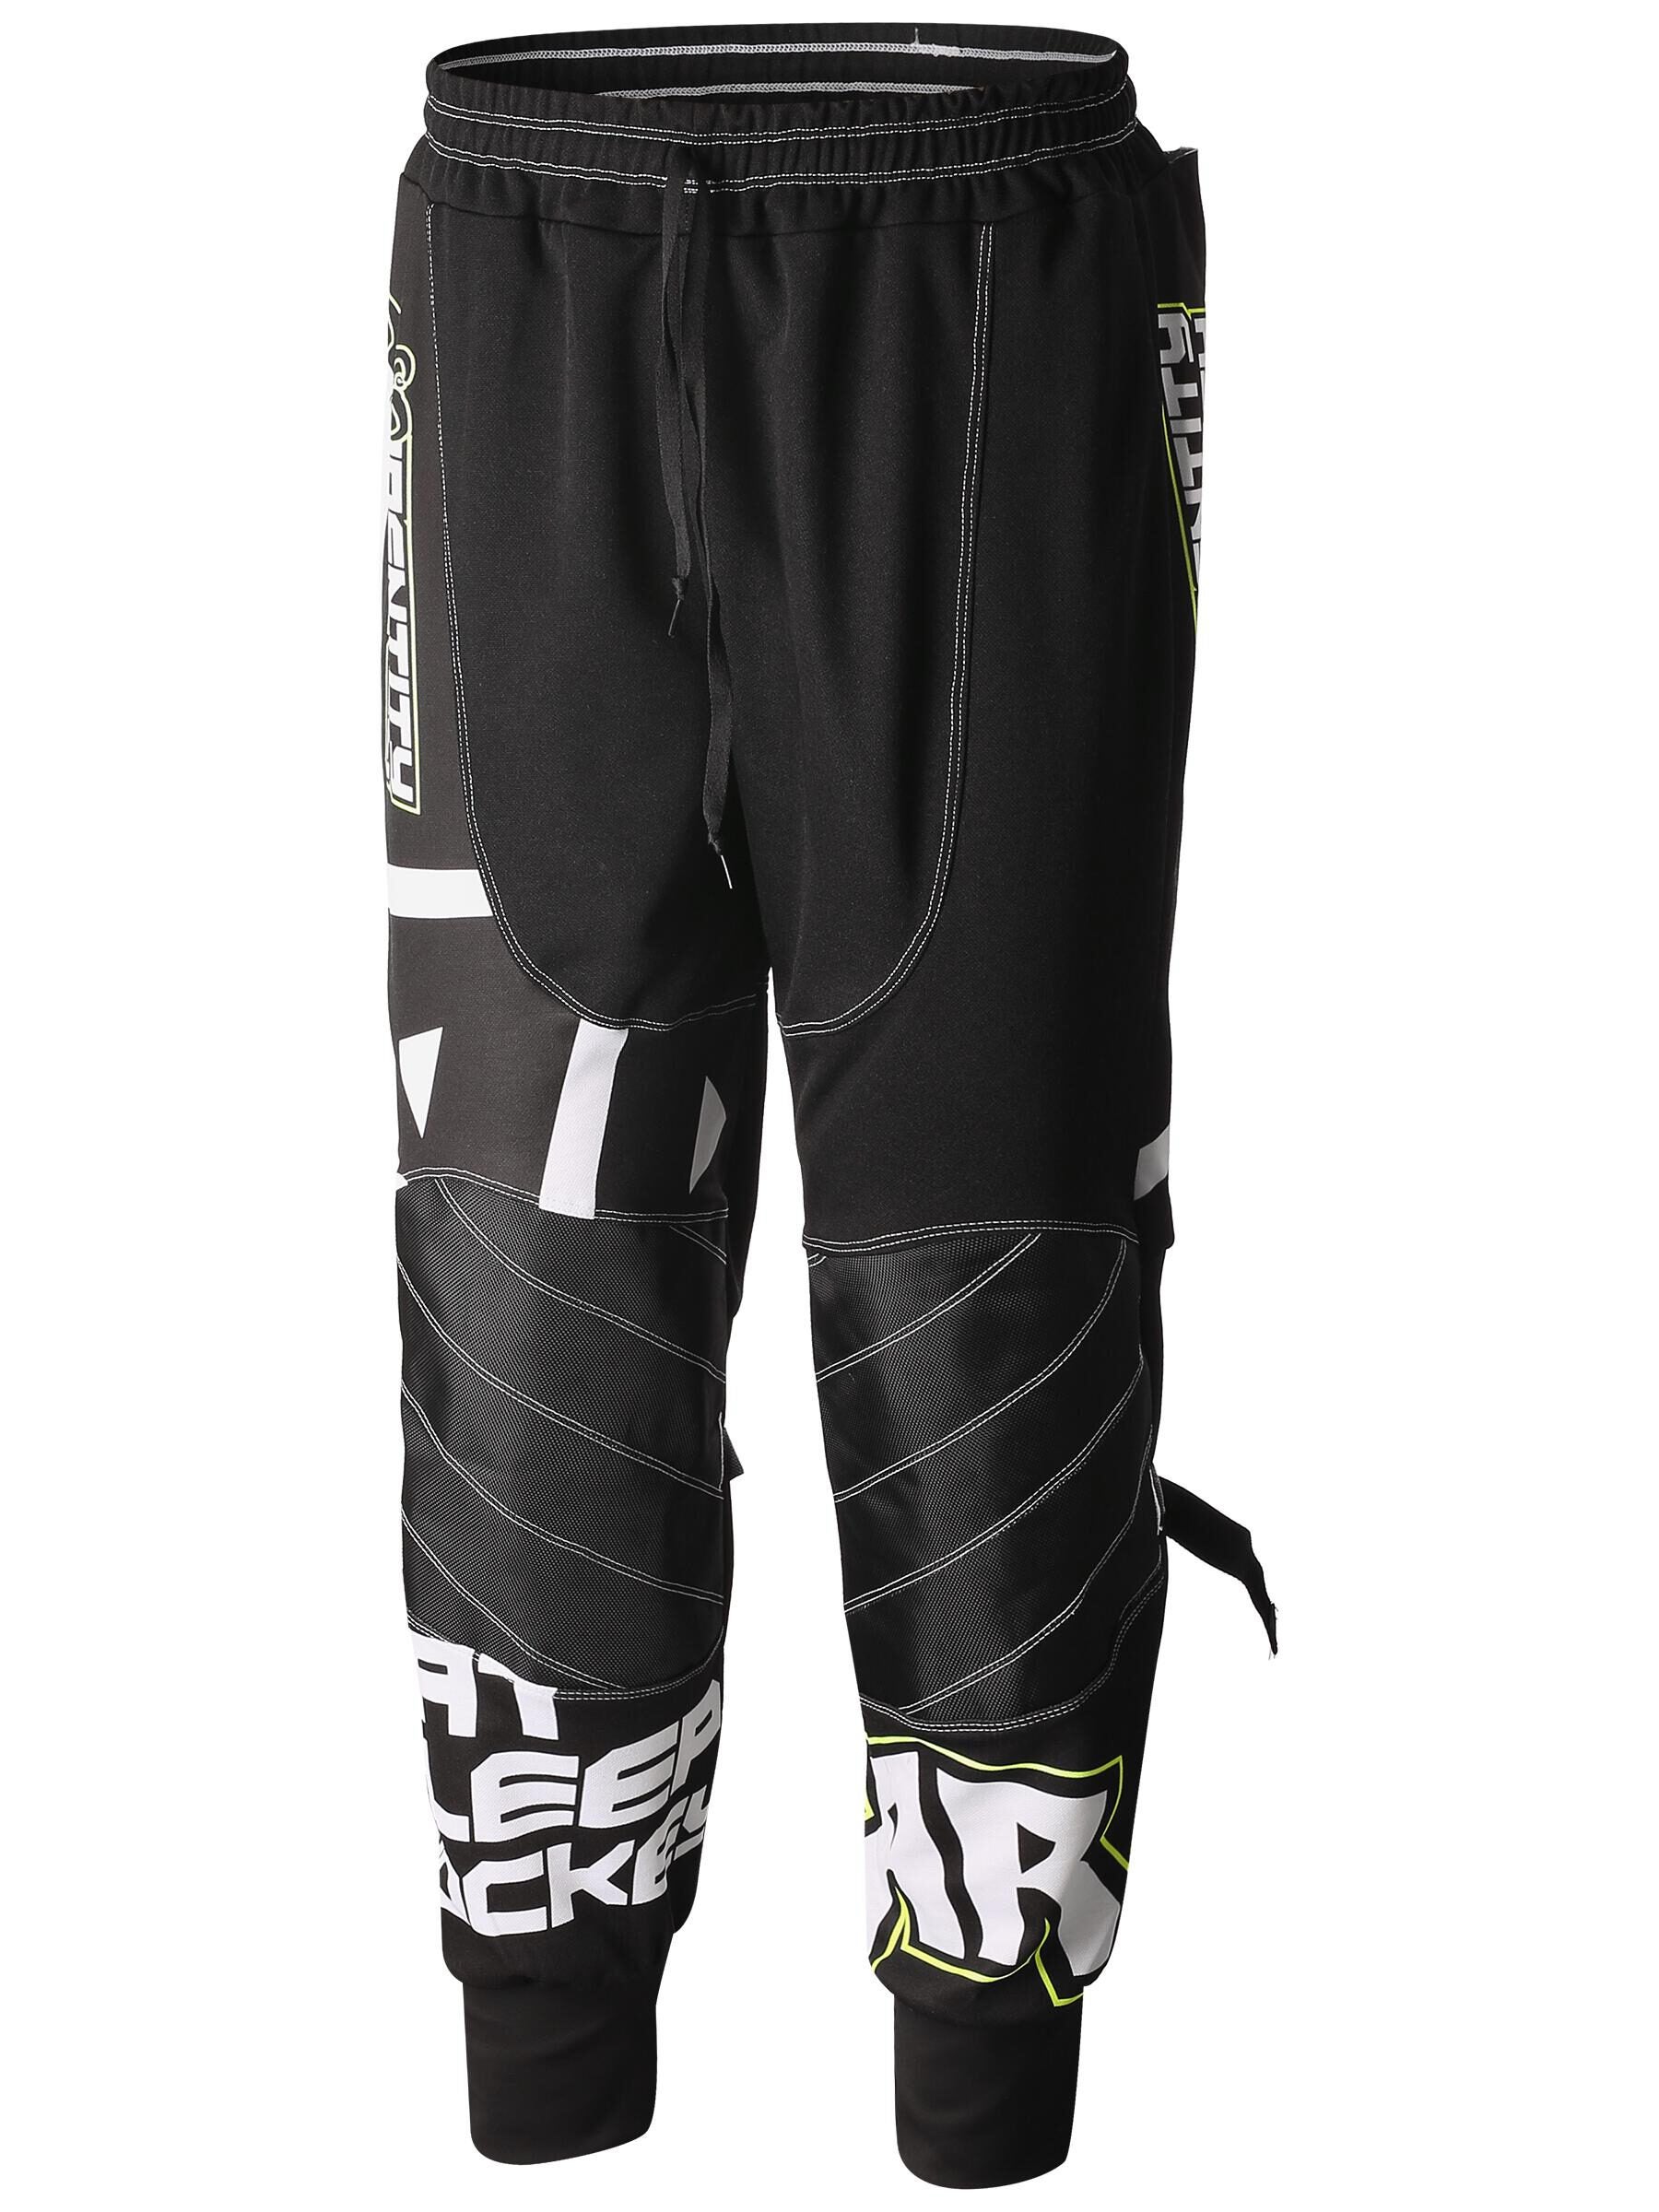 Details about   LABEDA Roller Hockey Inline PANTS PAMA 7.1 BLACK/CHARCOAL/WHITE 